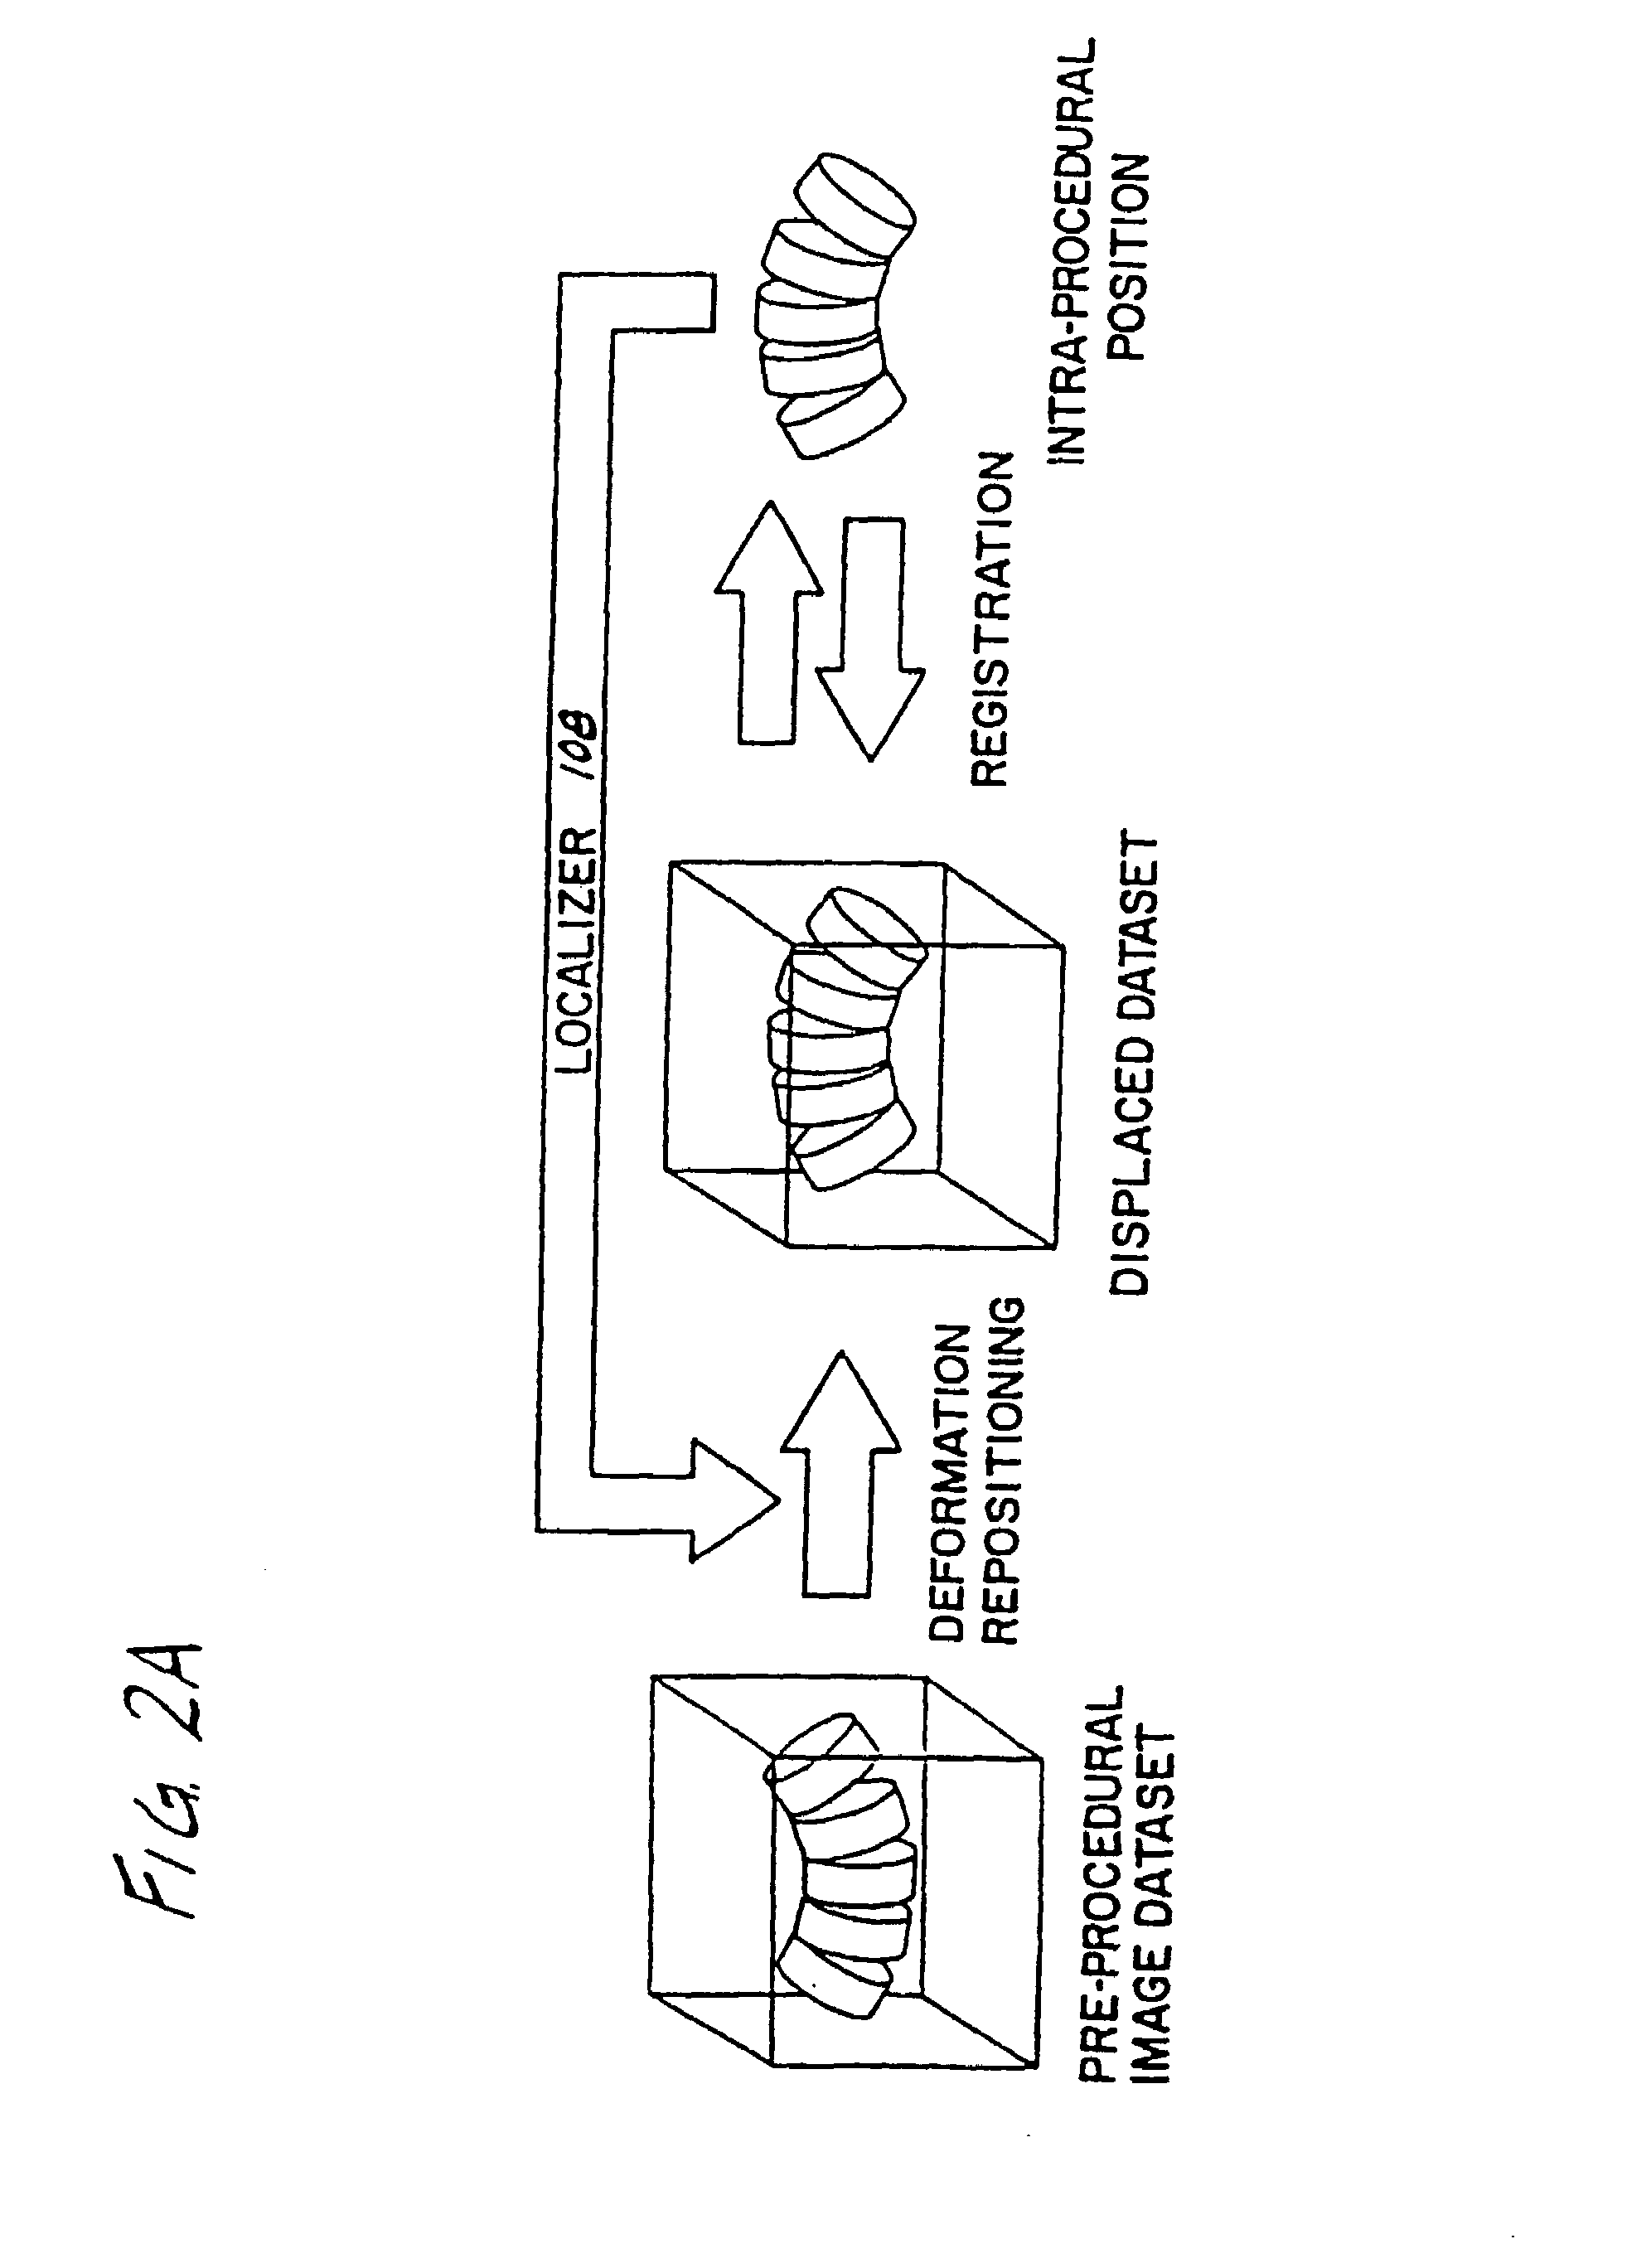 Surgical navigation systems including reference and localization frames